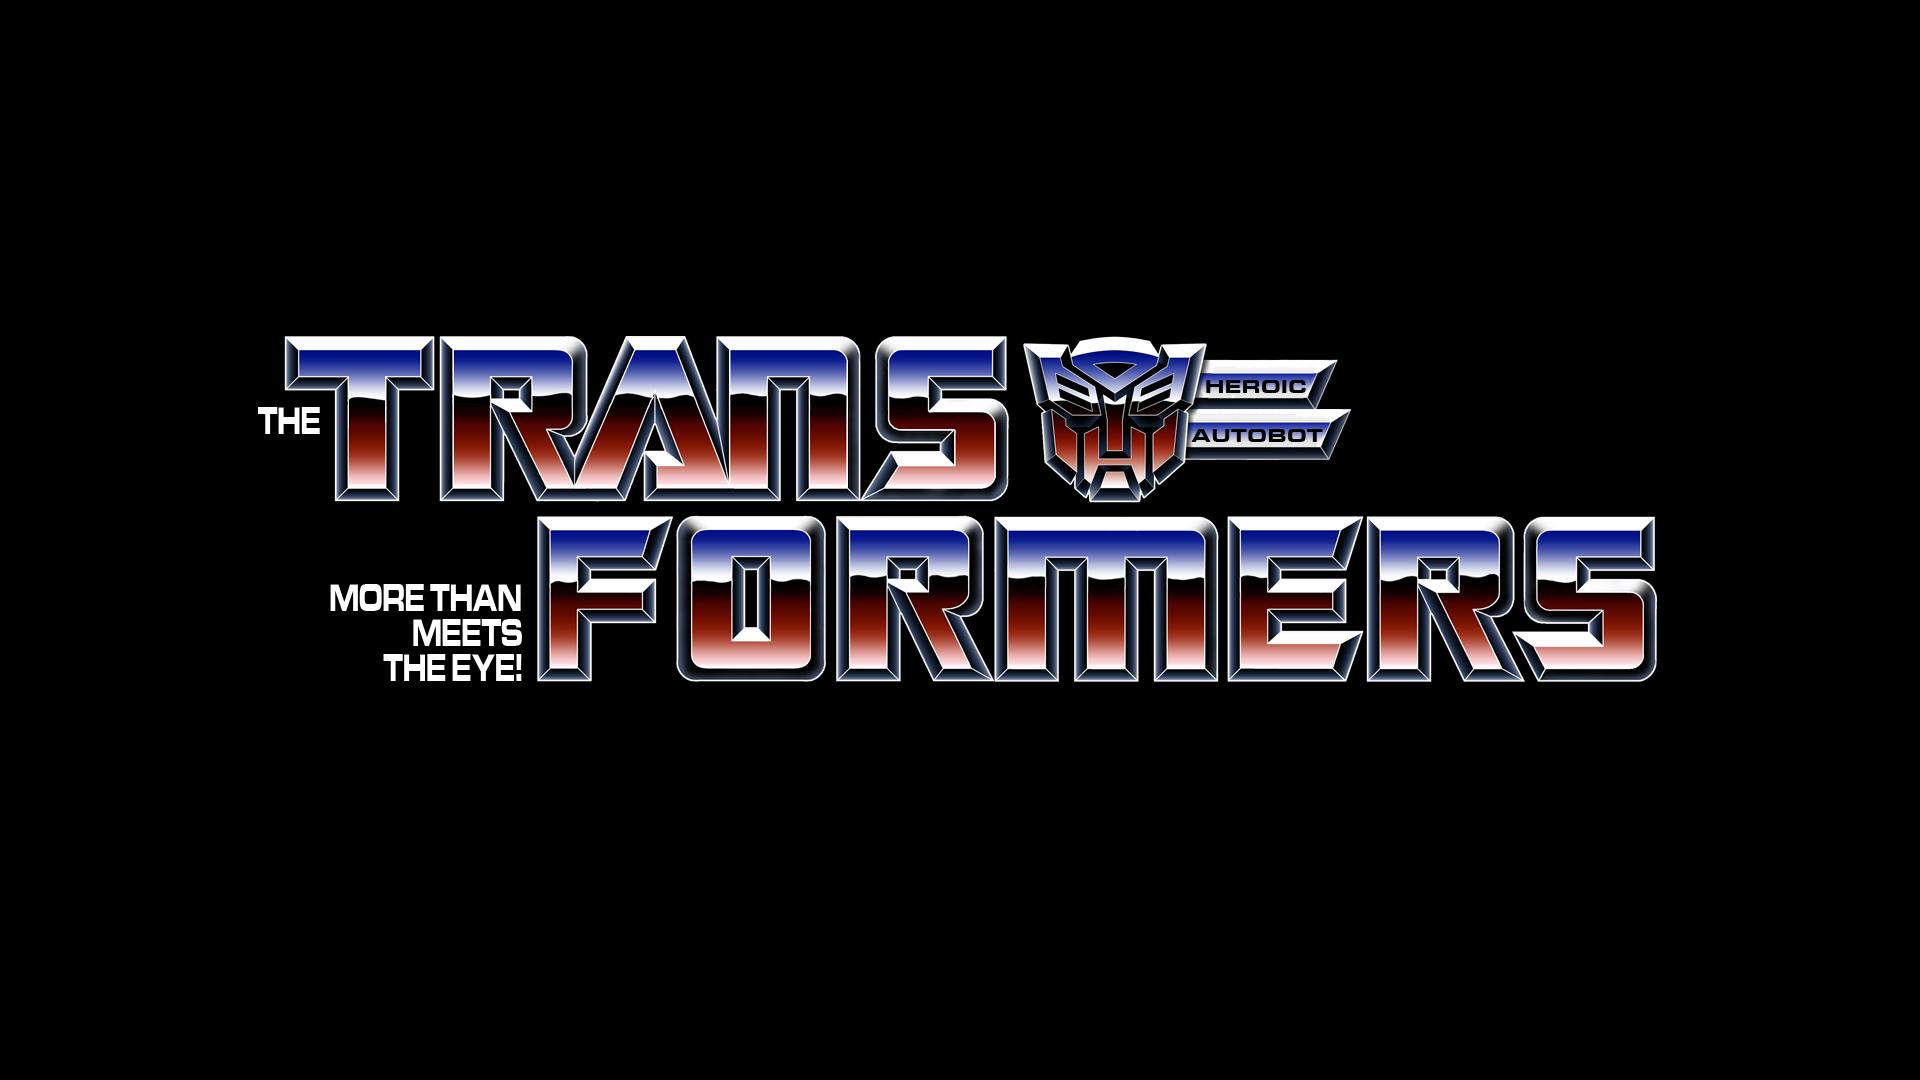 G1 Autobots Logo - A Gallery of Autobots Symbols - Mifty is Bored